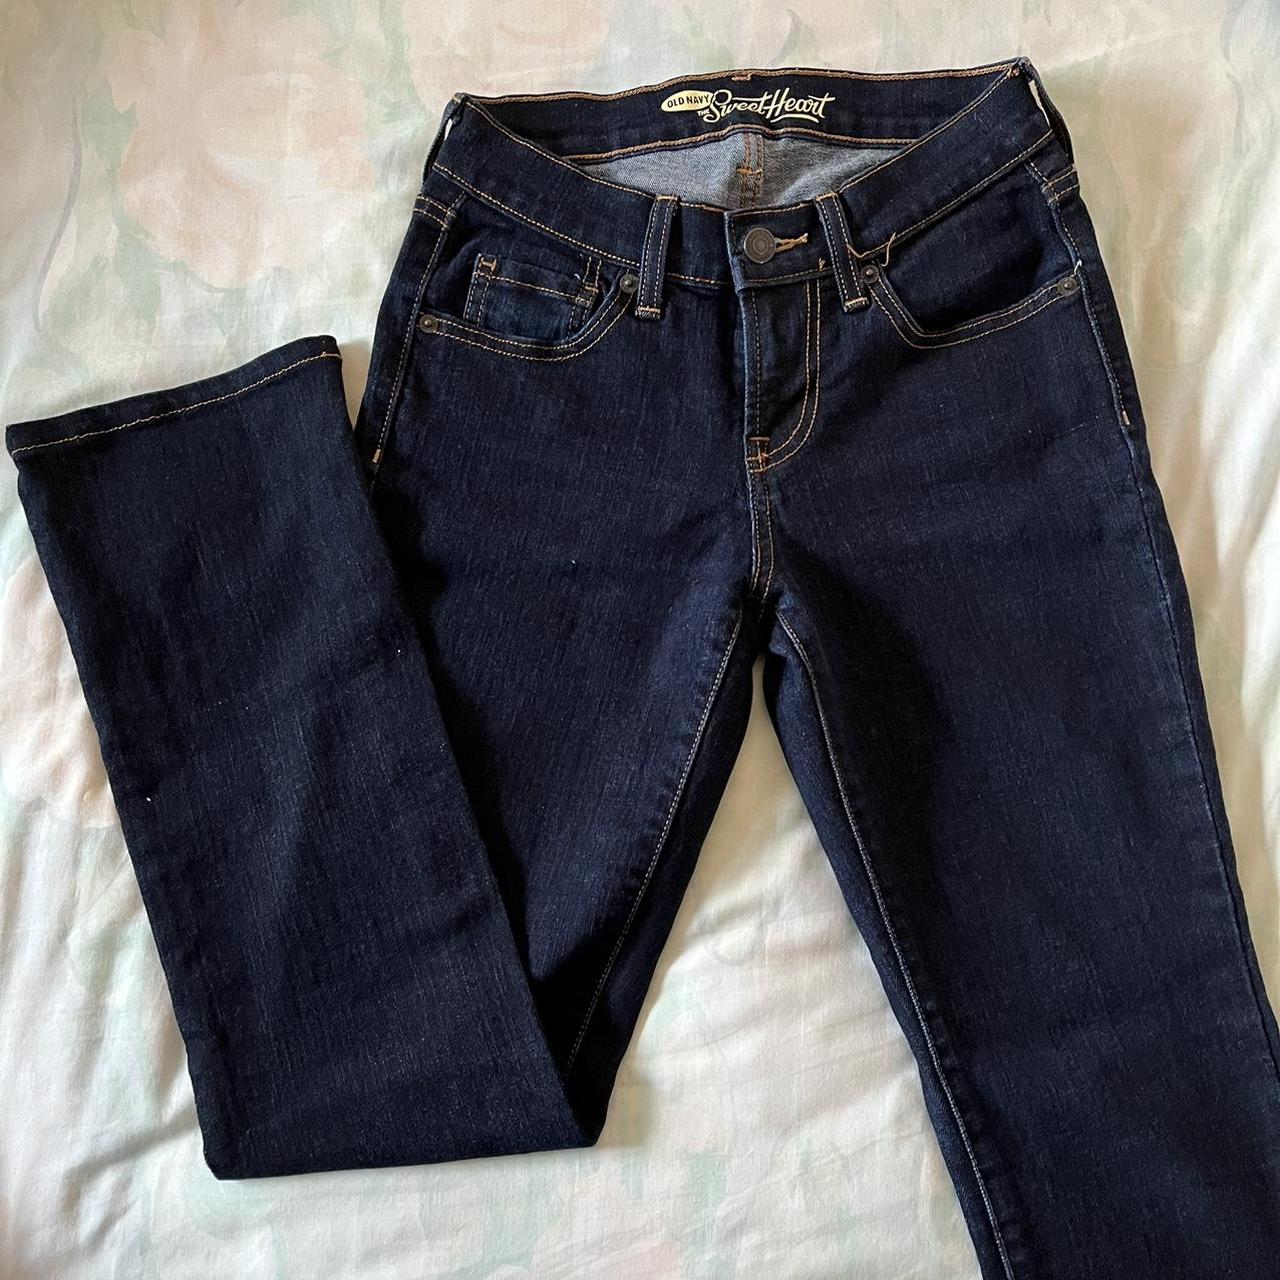 Old Navy Women's Navy and Blue Jeans | Depop